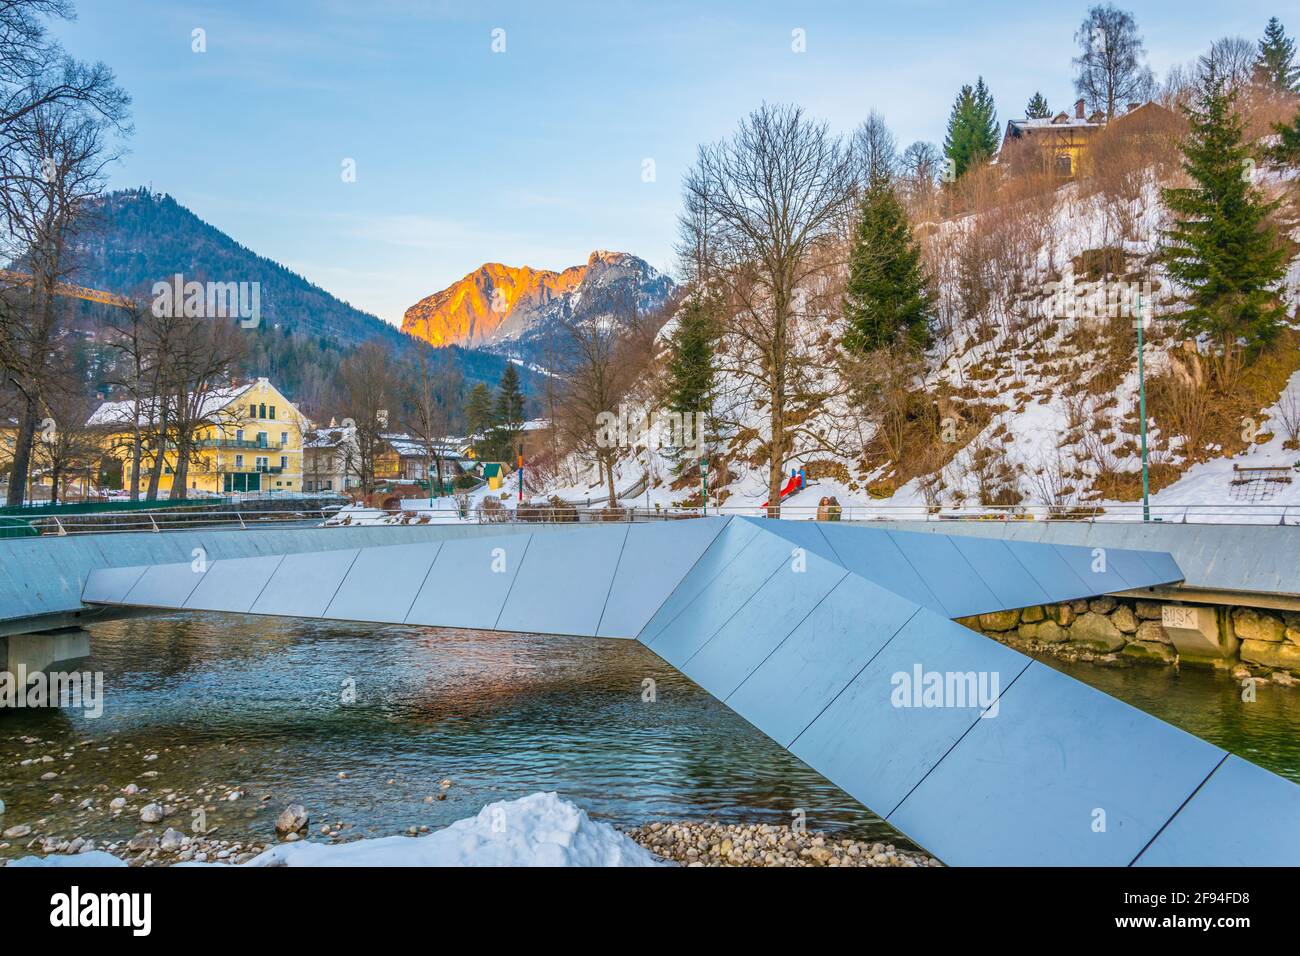 Famous Mercedes bridge over river Koppentraun in Bad Aussee town in Austria with Stock Photo